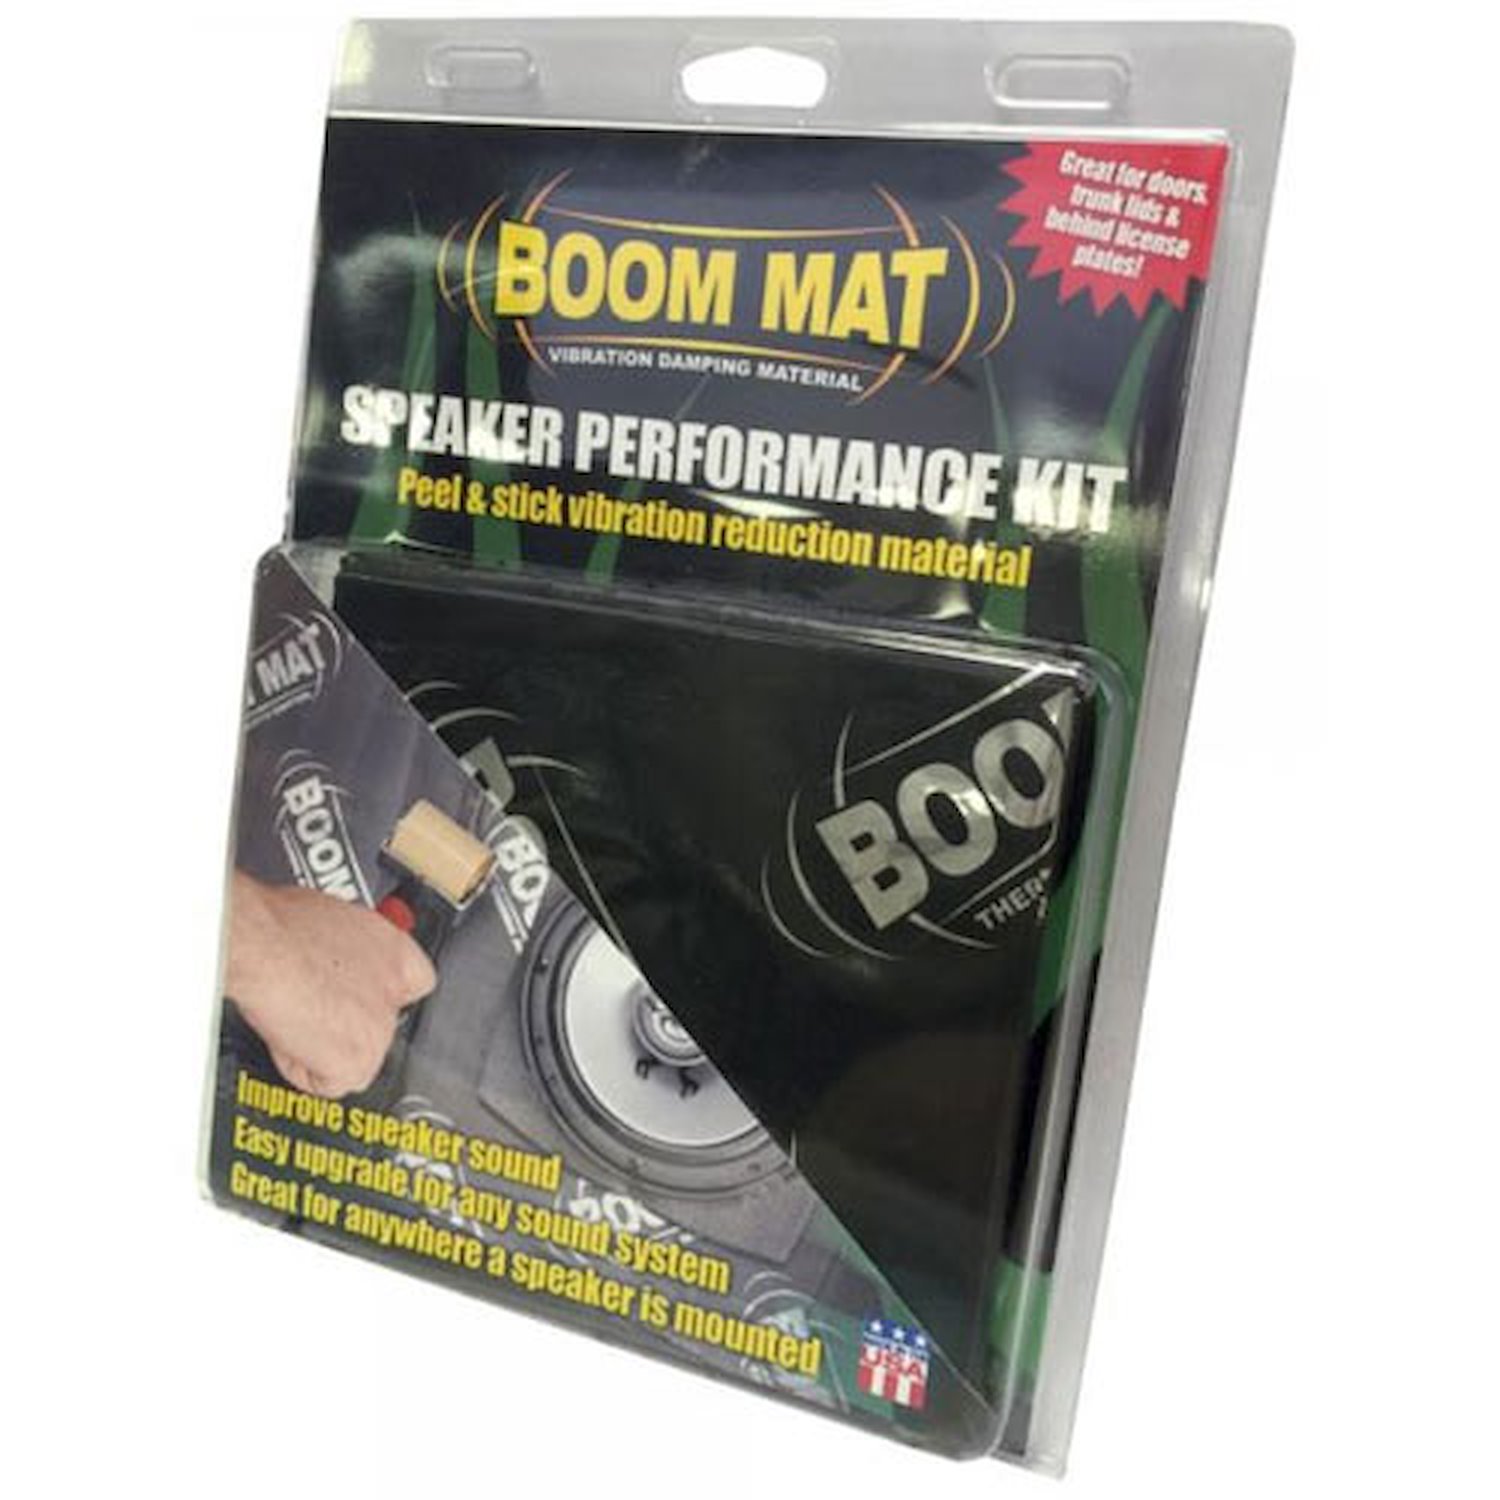 Speaker Performance Kit Includes: 2- 12" x 12.5" Boom Mat Damping Material Sheets